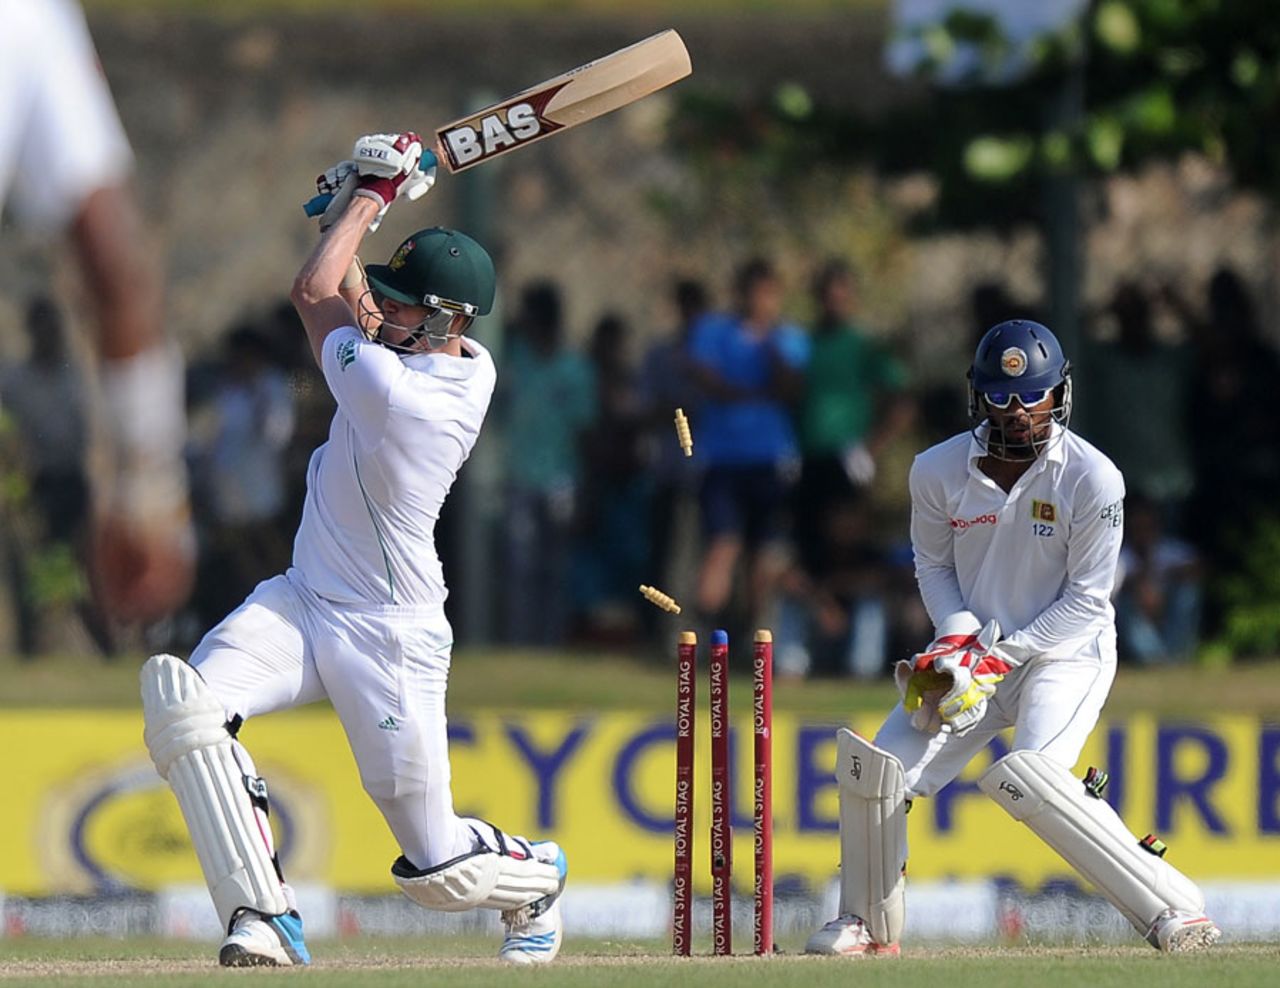 Morne Morkel was bowled by Dilruwan Perera for 22, Sri Lanka v South Africa, 1st Test, Galle, 2nd day, July 17, 2014